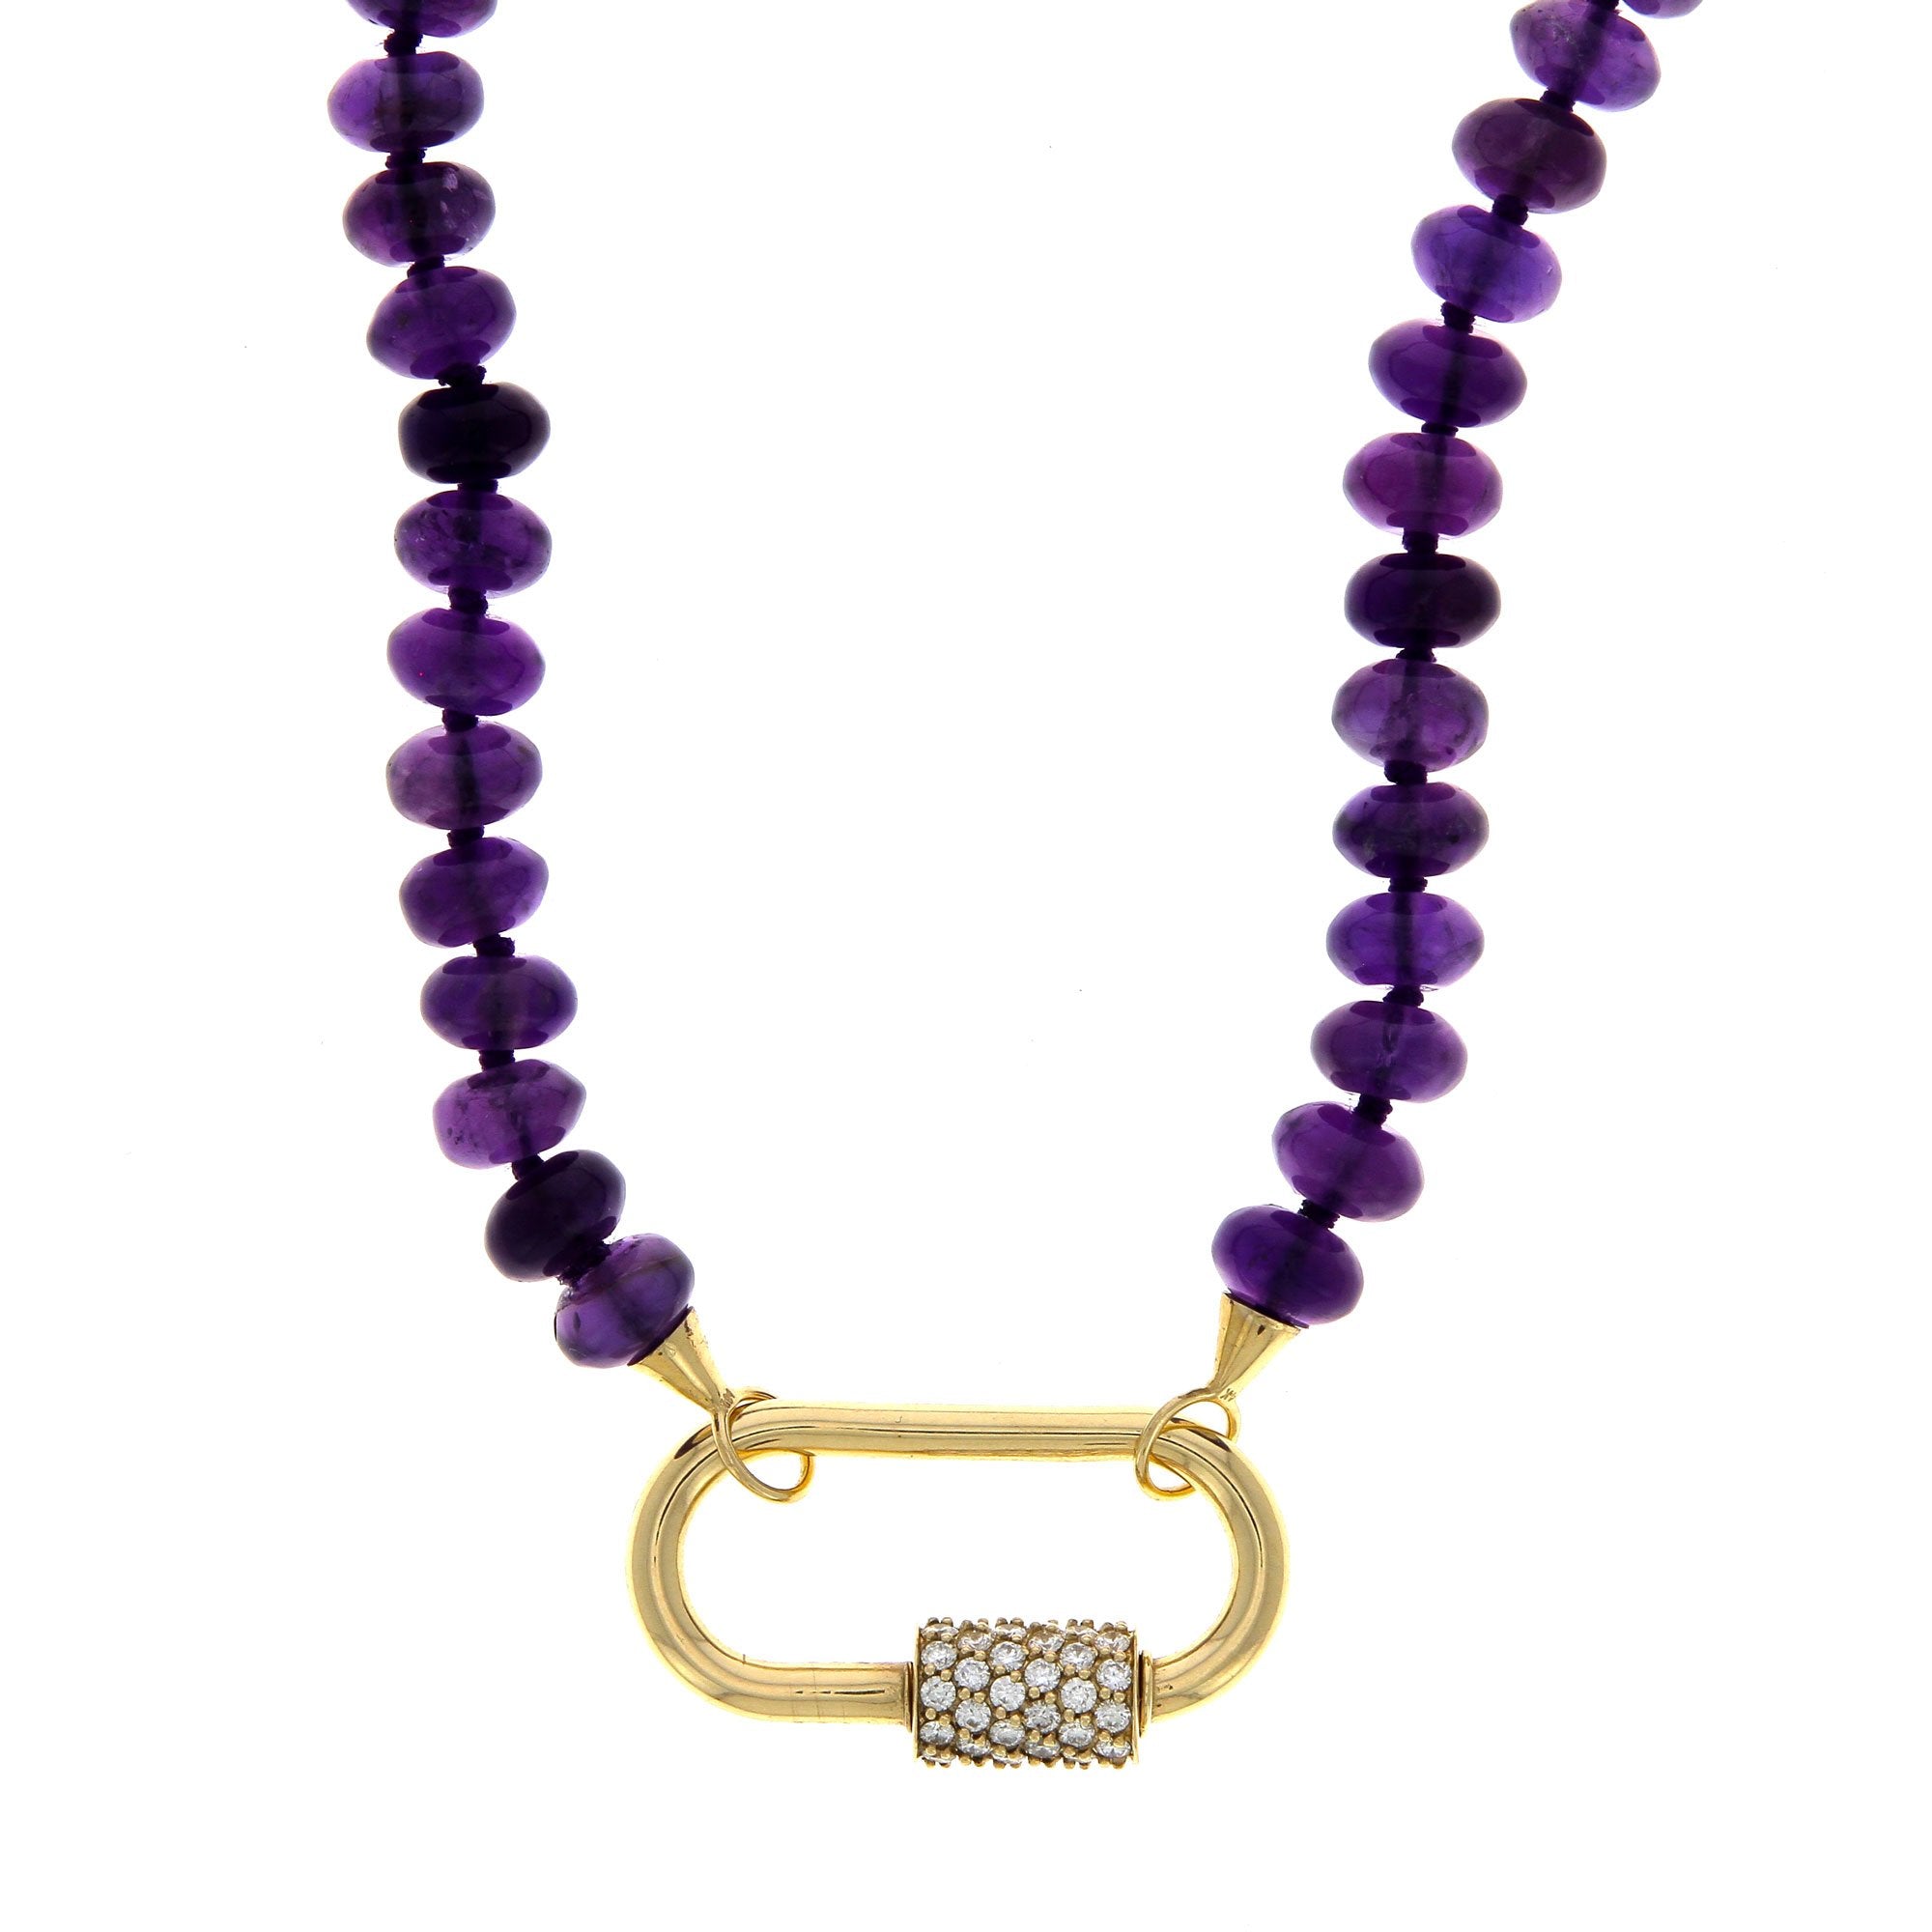 Amethyst Necklace with Yellow Gold Loops